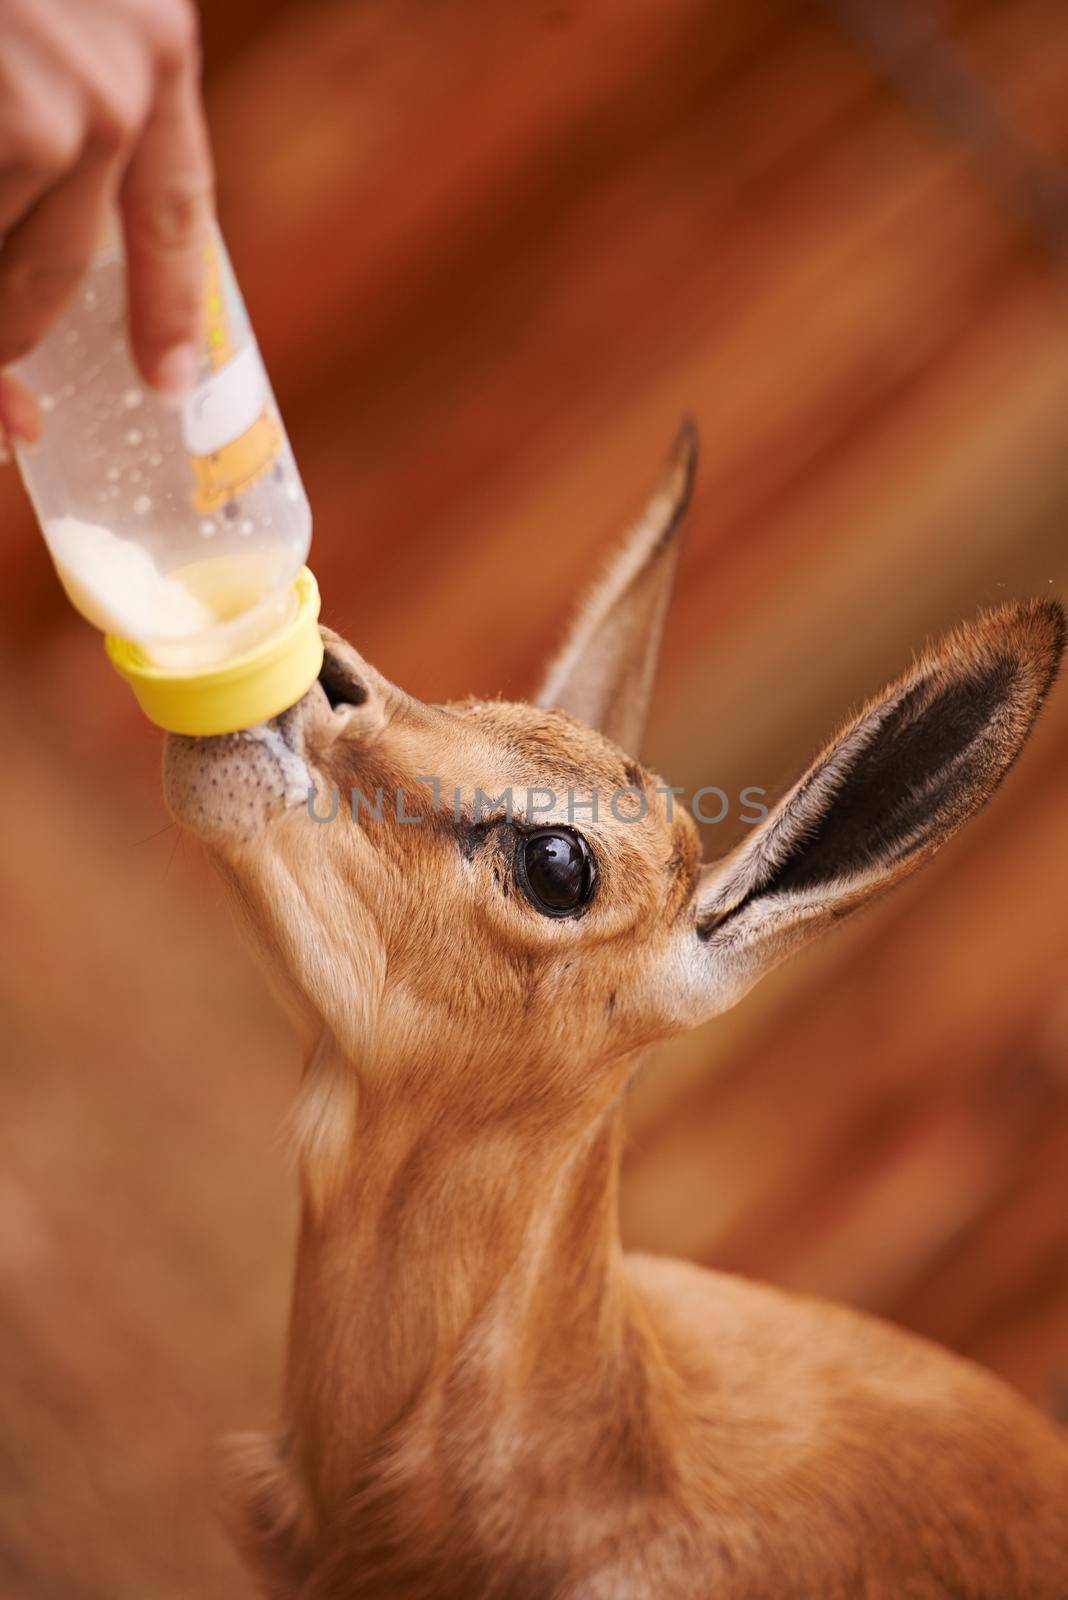 Lending a caring hand. Cropped view of a baby springbok being bottle-fed. by YuriArcurs